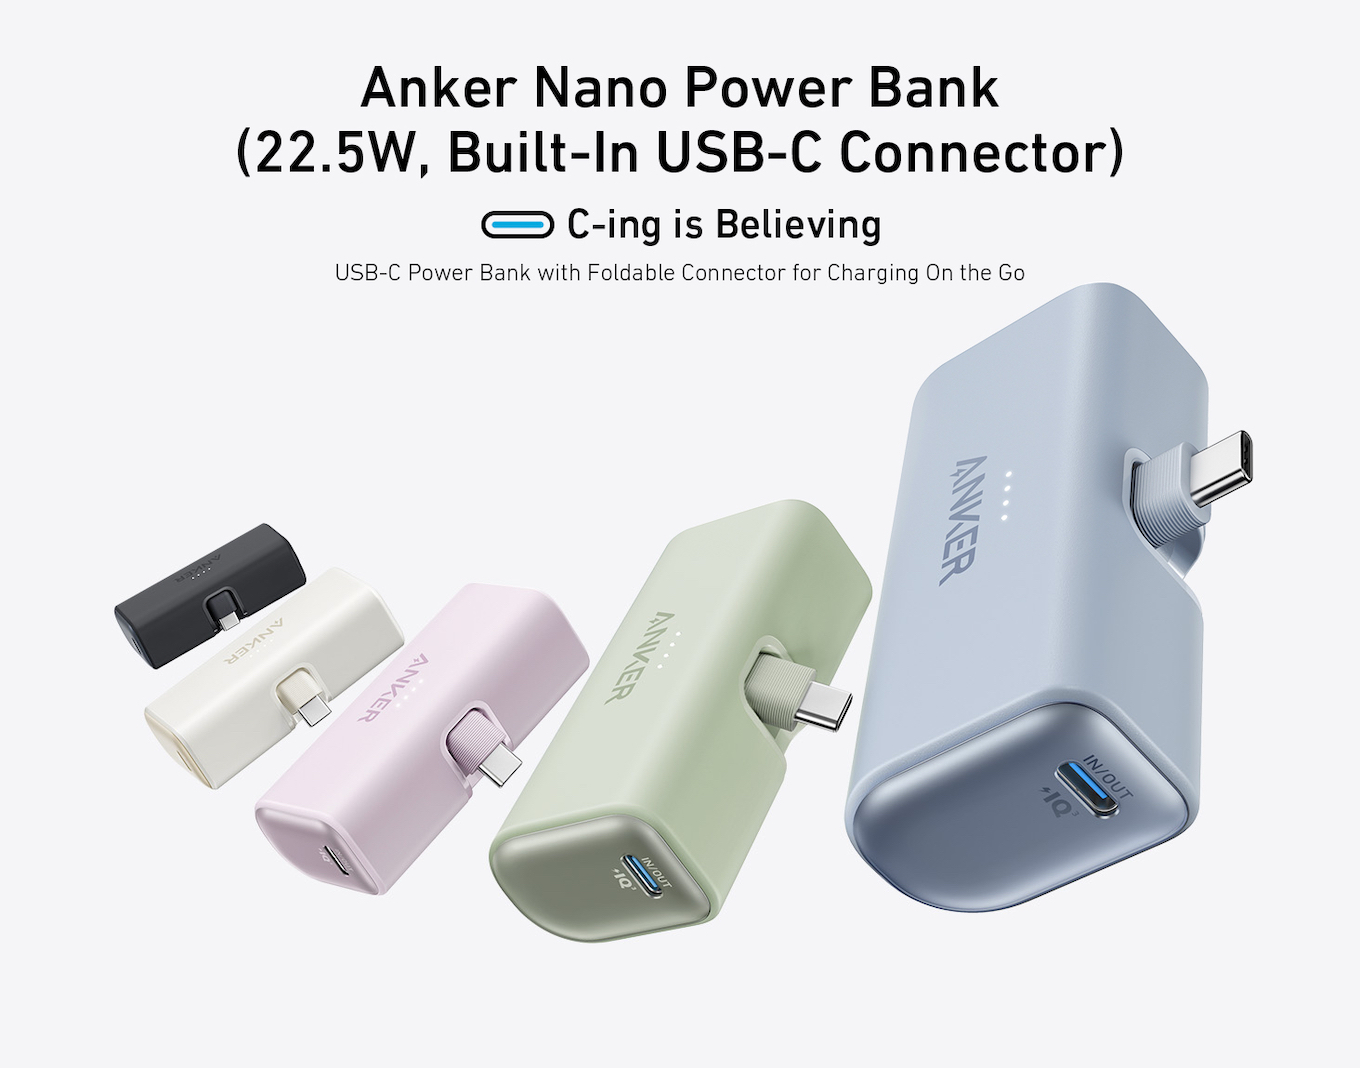 Anker Nano Power Bank 22.5W Built-In USB-C Connector